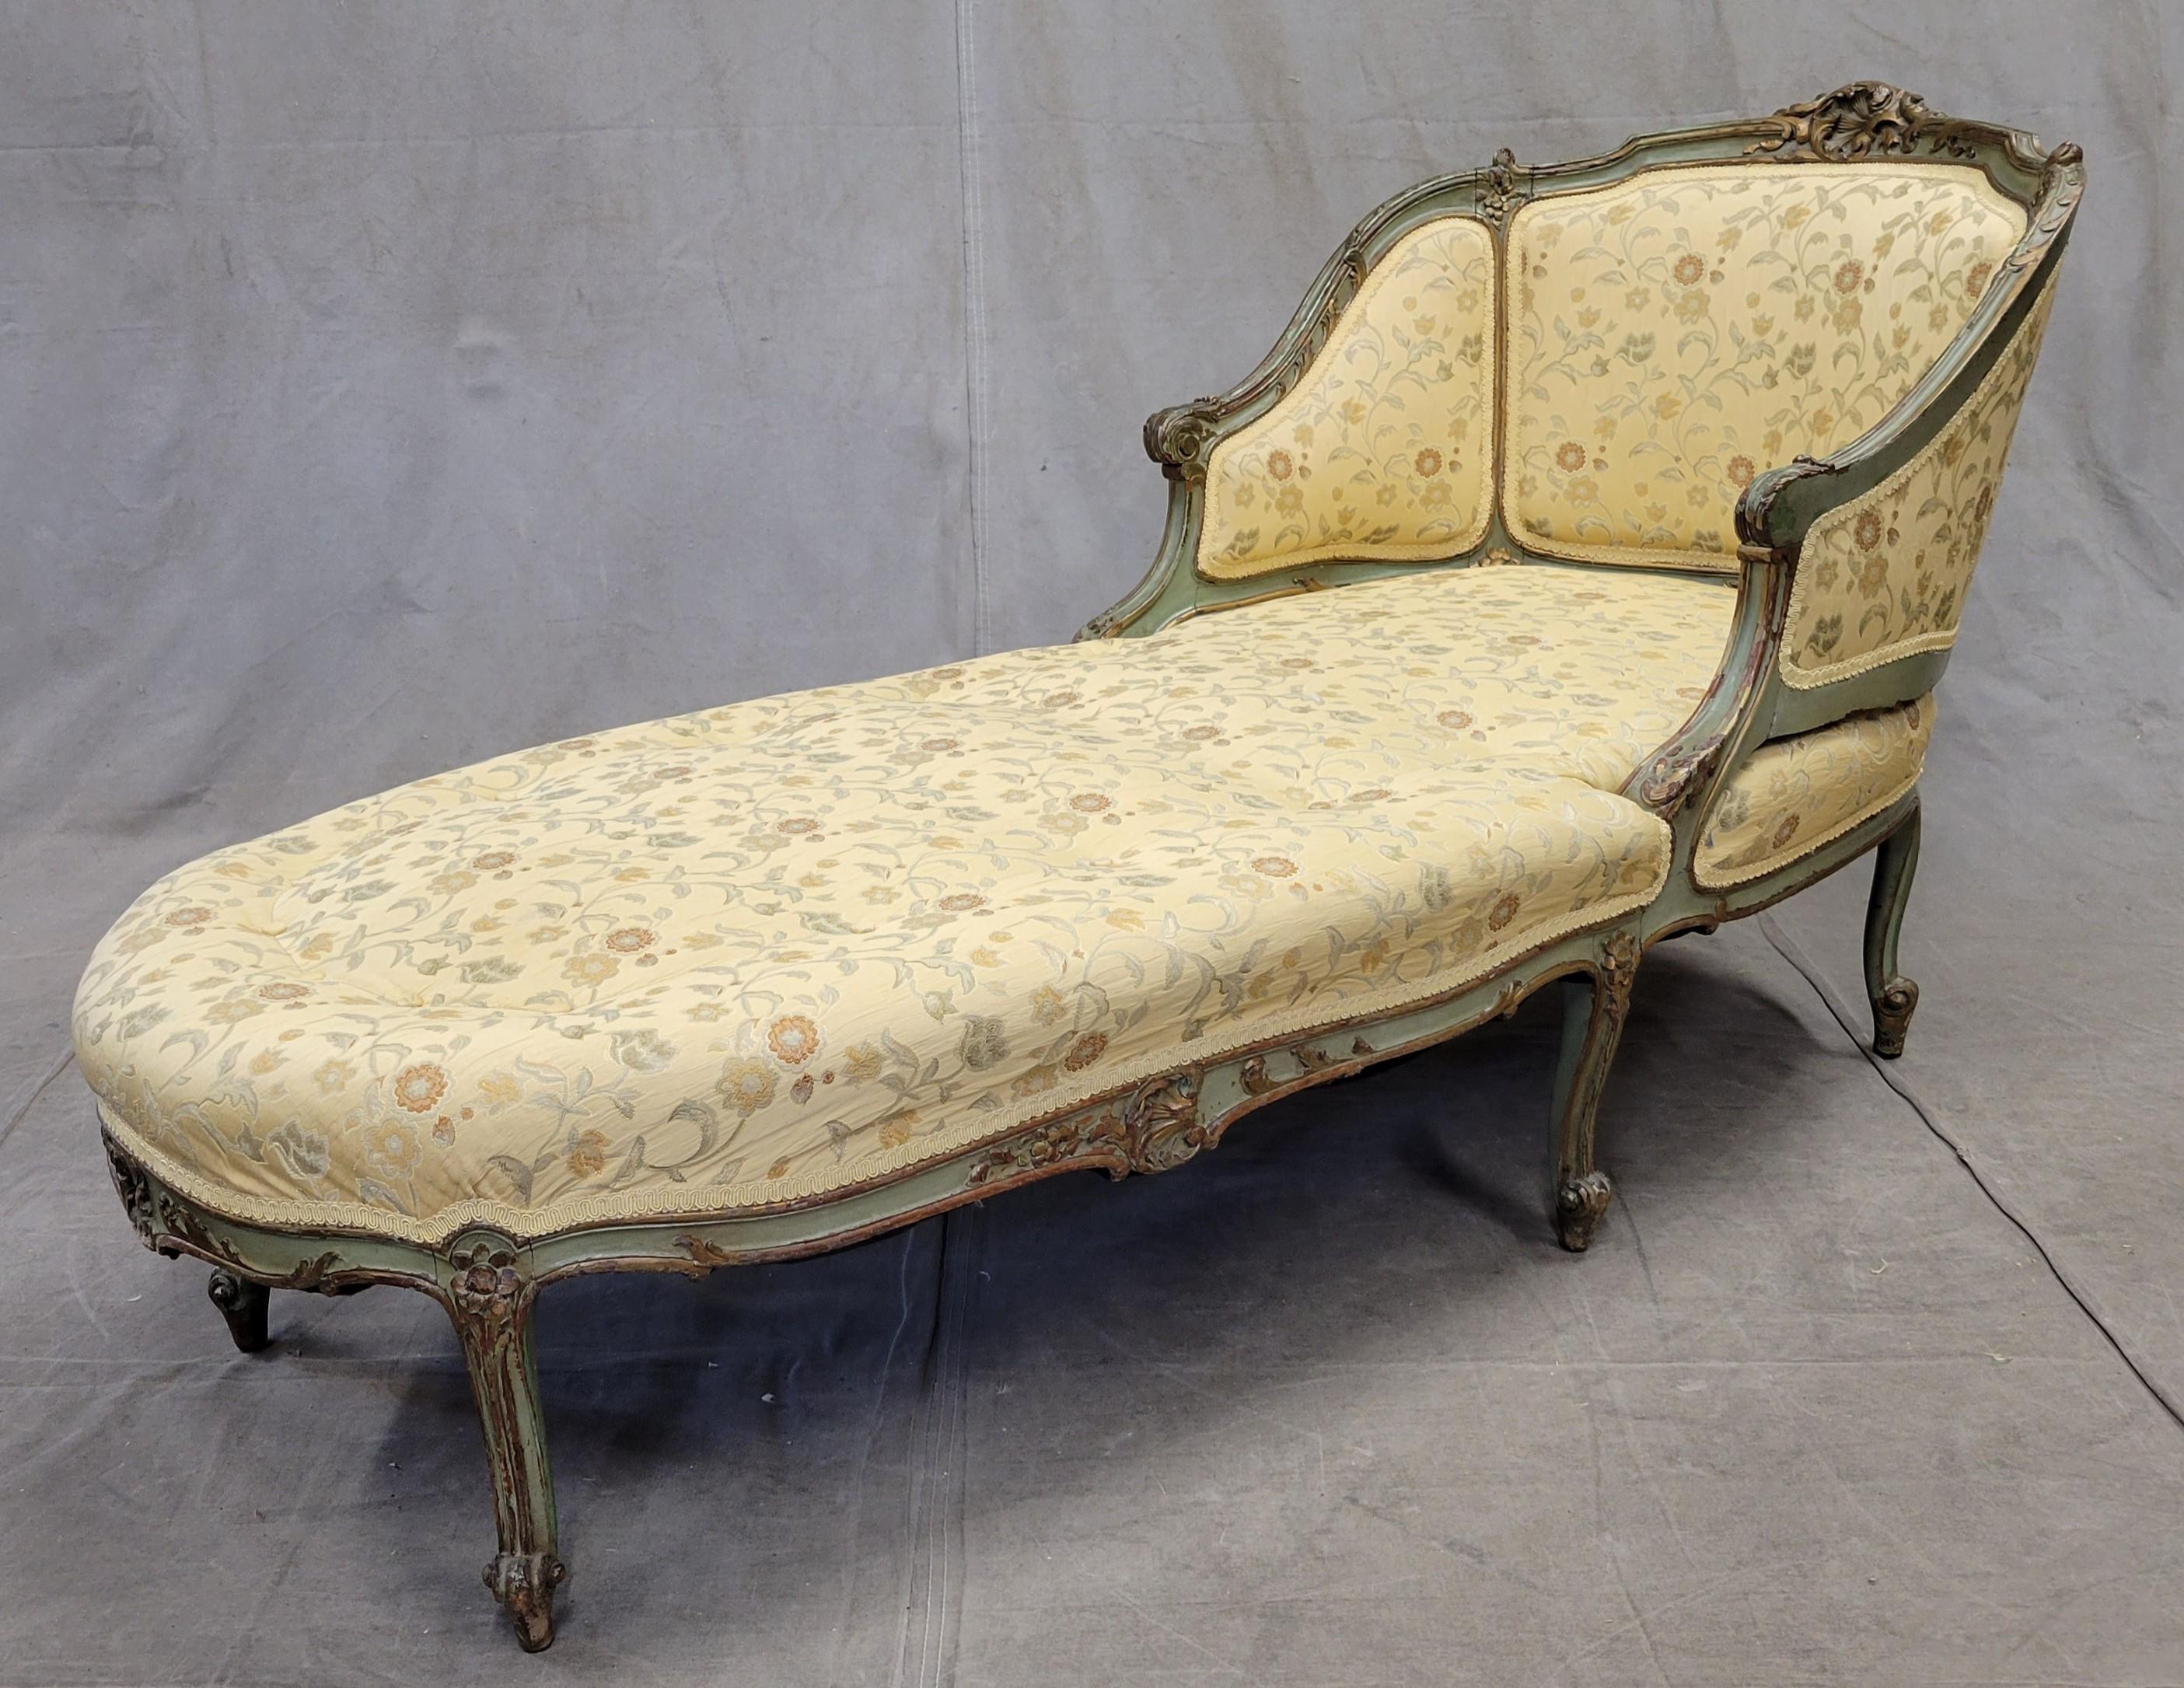 An absolutely stunning antique 19th century Louis XV style chaise lounge with modern upholstery. The chaise frame is sturdy and stunning, painted in shades of green and gold. The modern brocade upholstery in shades of creamy pale yellow with accents